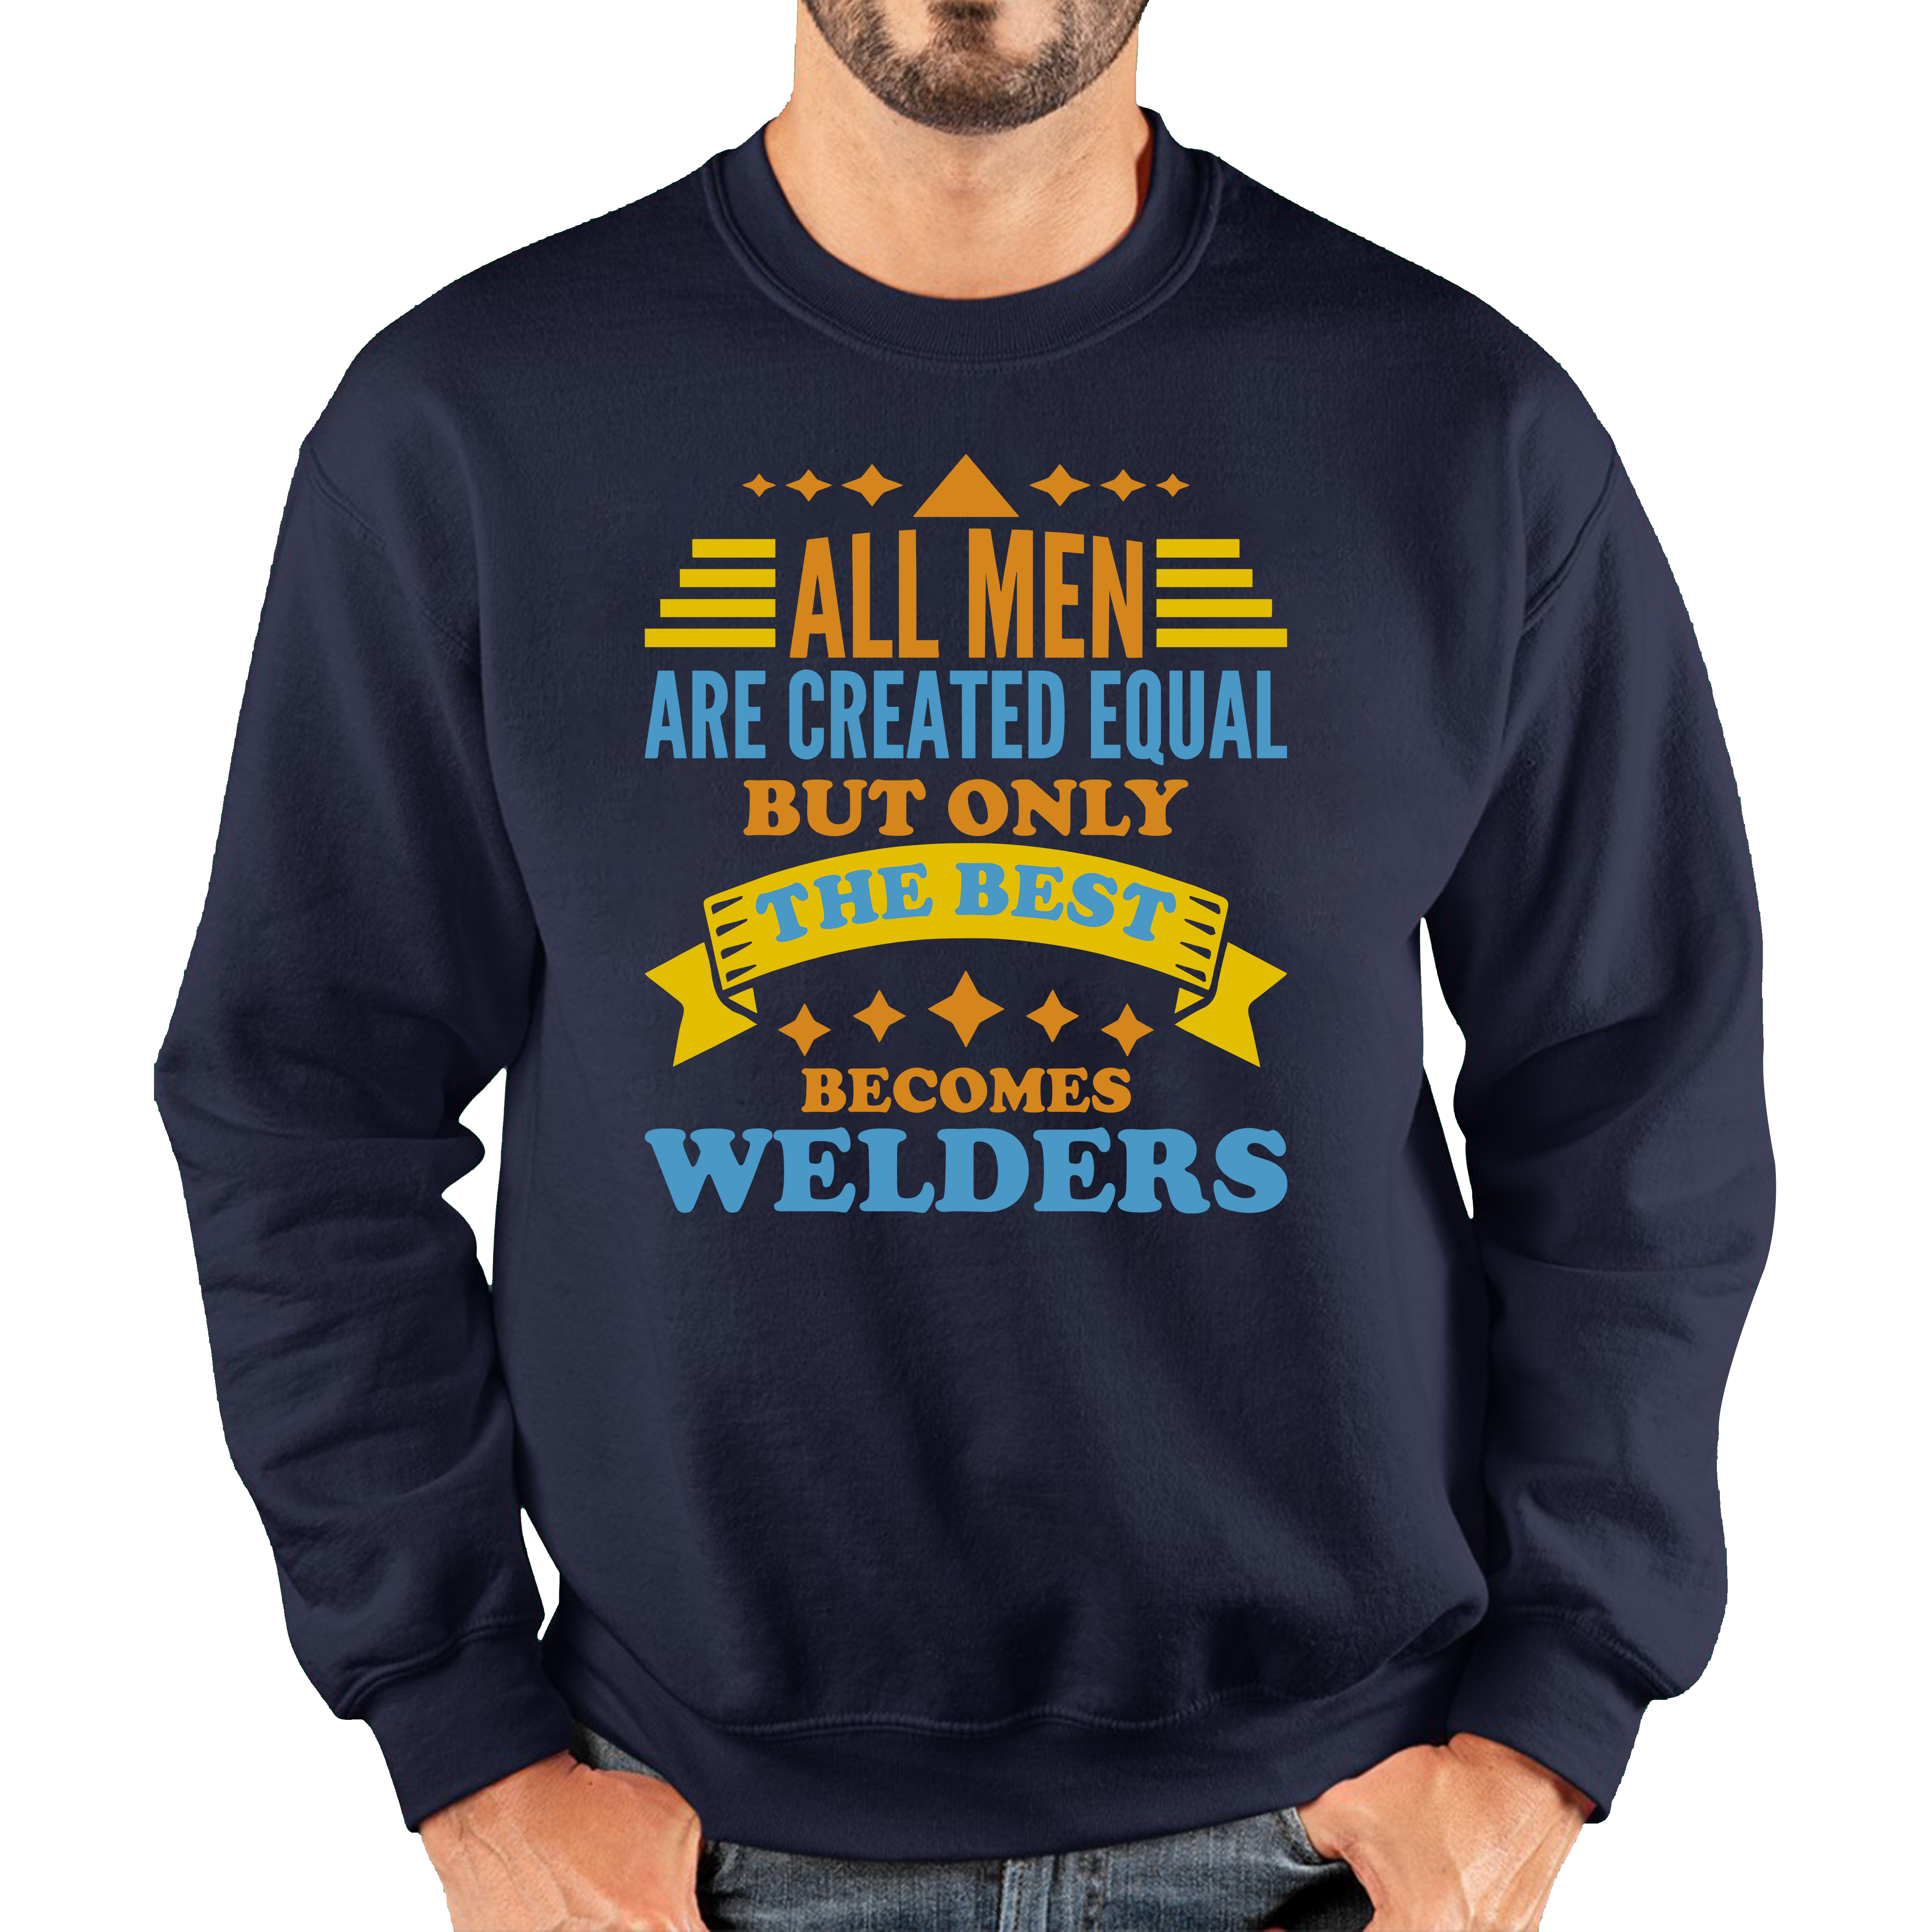 All Men Are Created Equal But Only The Best Becomes Welders Unisex Sweatshirt